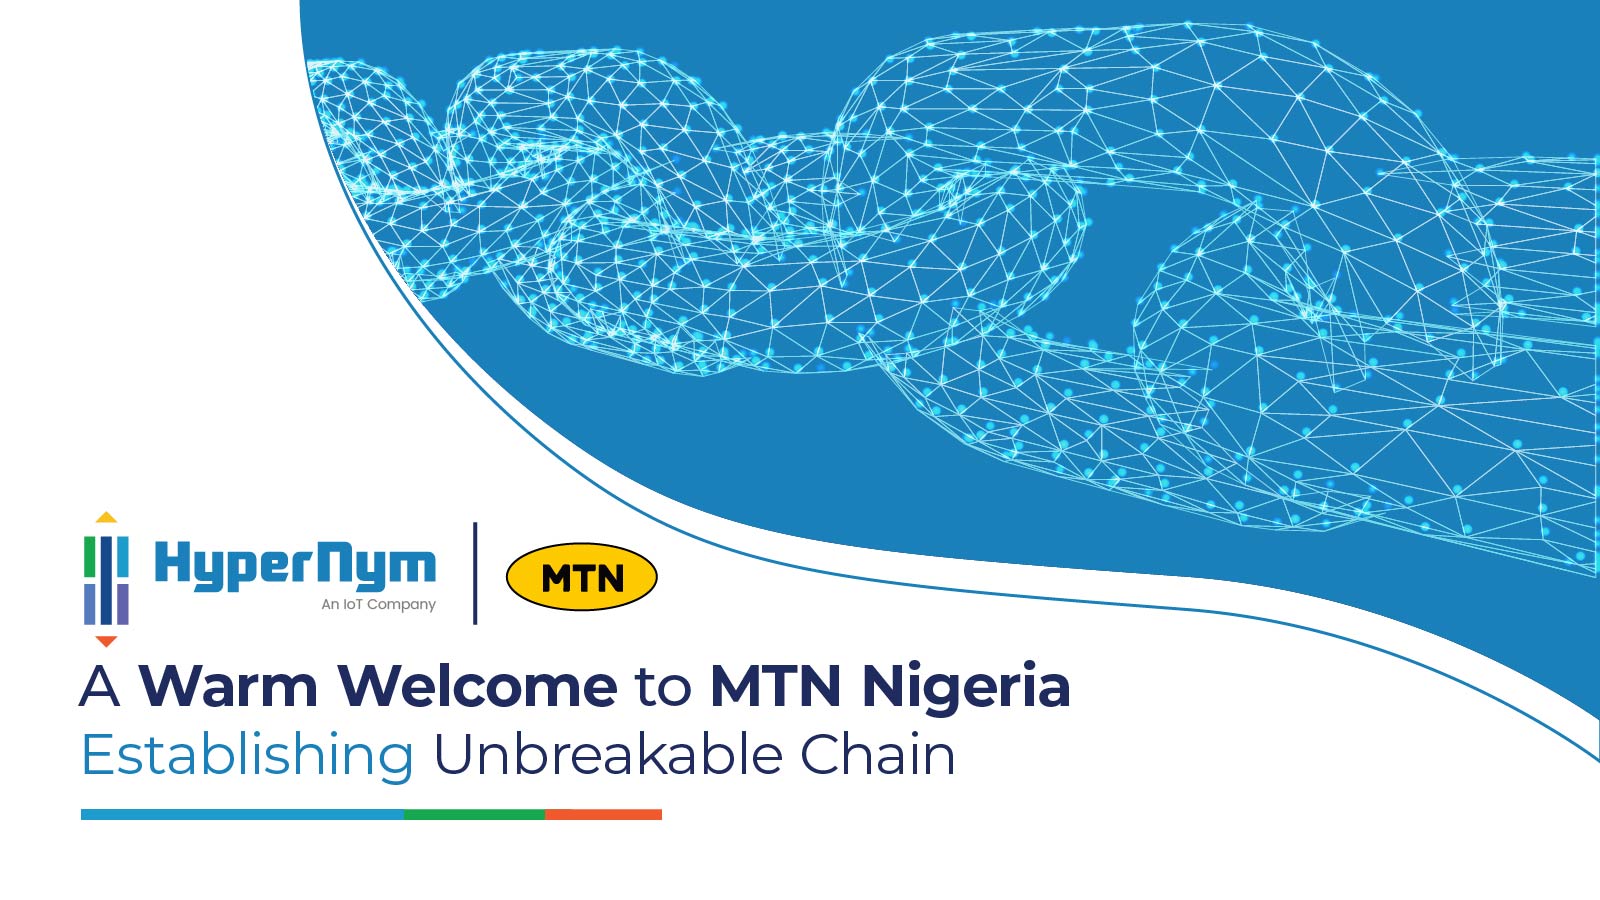 mtn-nigeria-signs-up-for-hypernym's-iot-platform-“hypernet”-to-expand-their-iot-offerings-in-nigeria-market